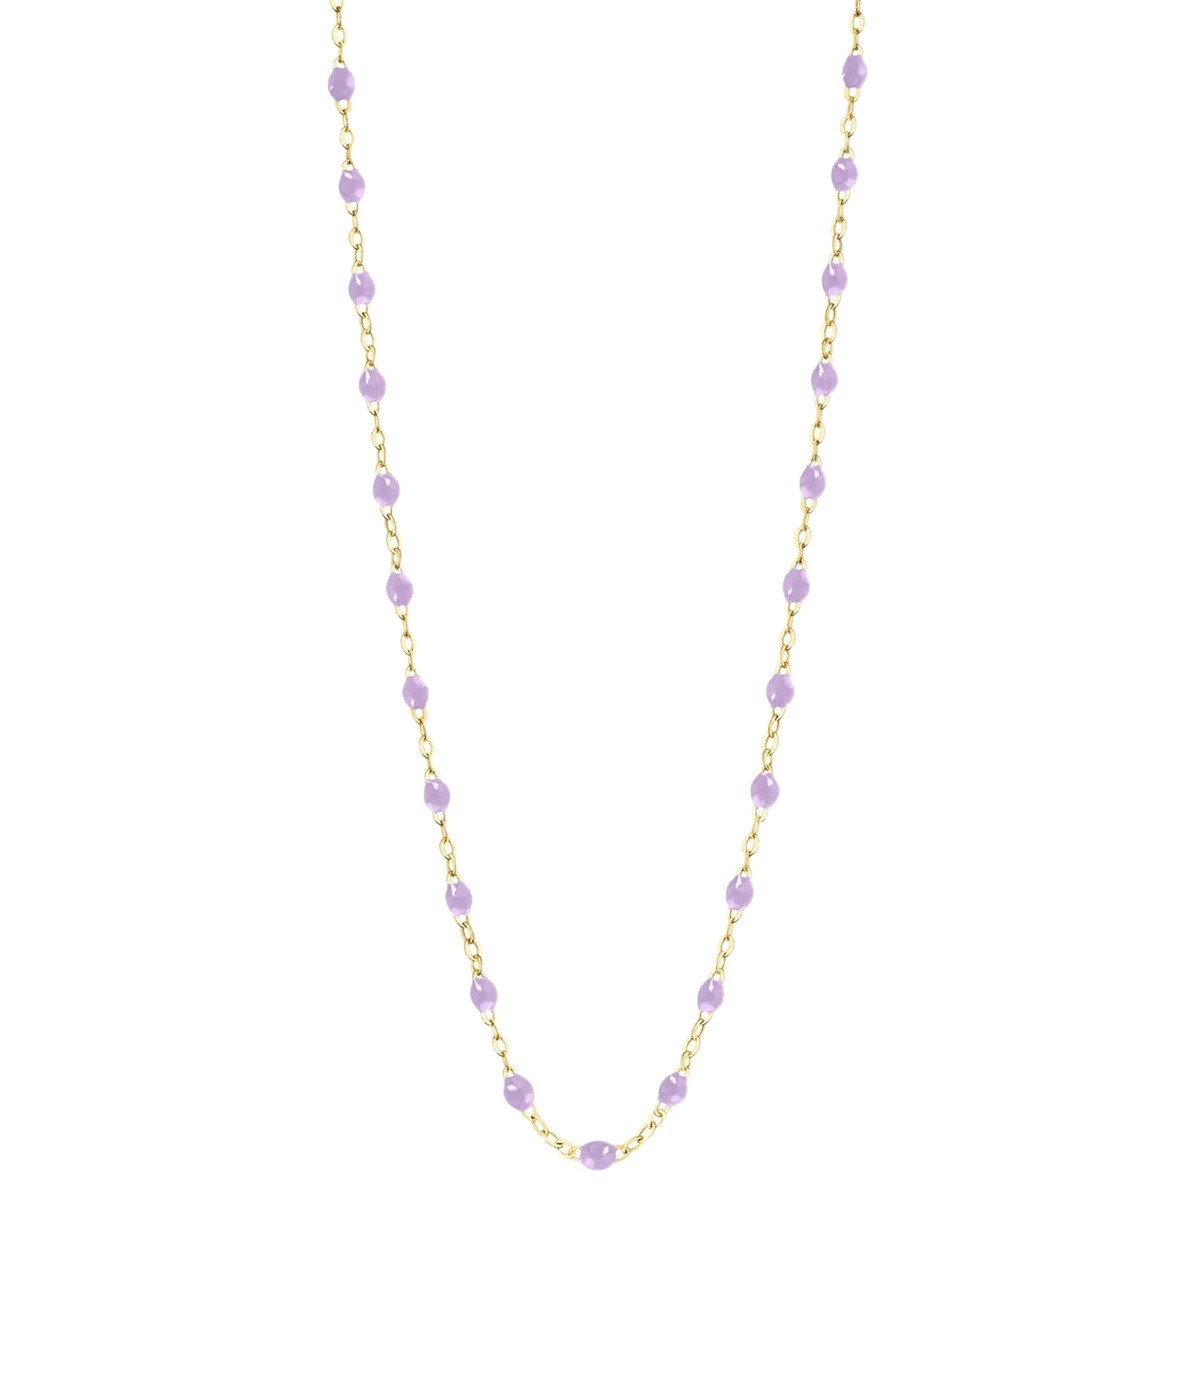 Classic Gigi 45cm Necklace in 18K Yellow Gold & Lilac